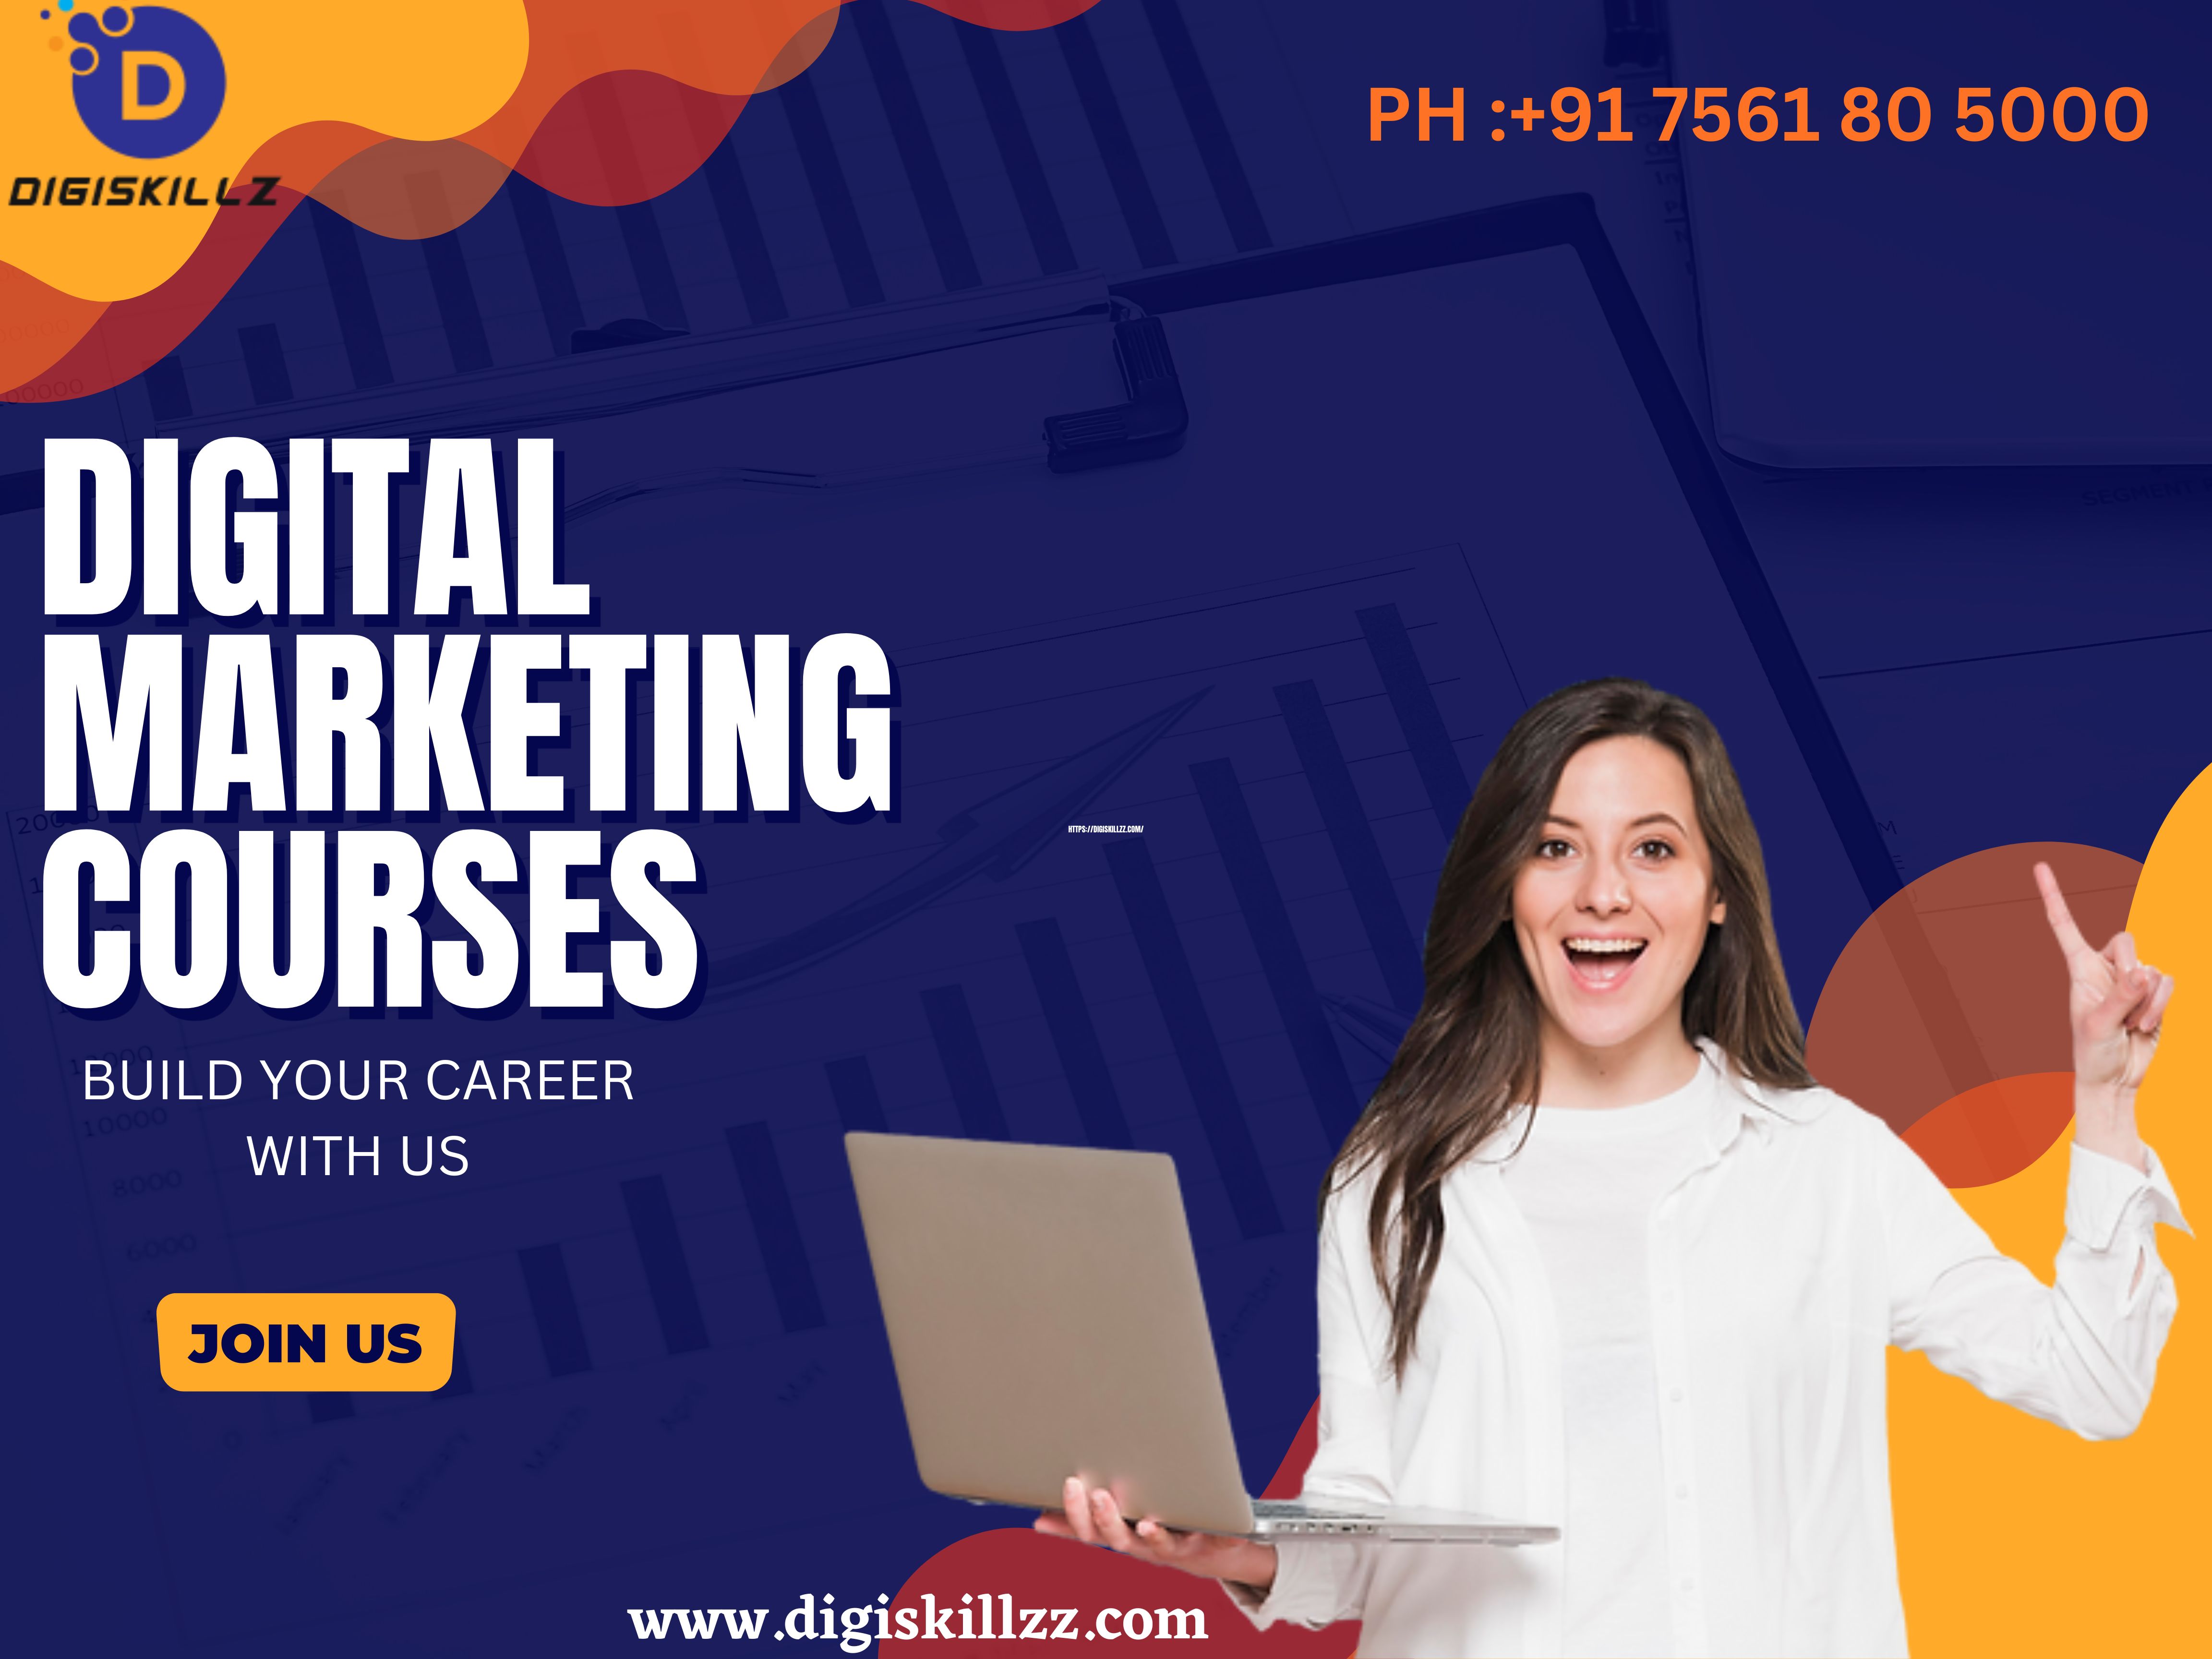 Digital marketing course in kochi | Digital marketing training course in ErnakulamEducation and LearningCoaching ClassesAll Indiaother